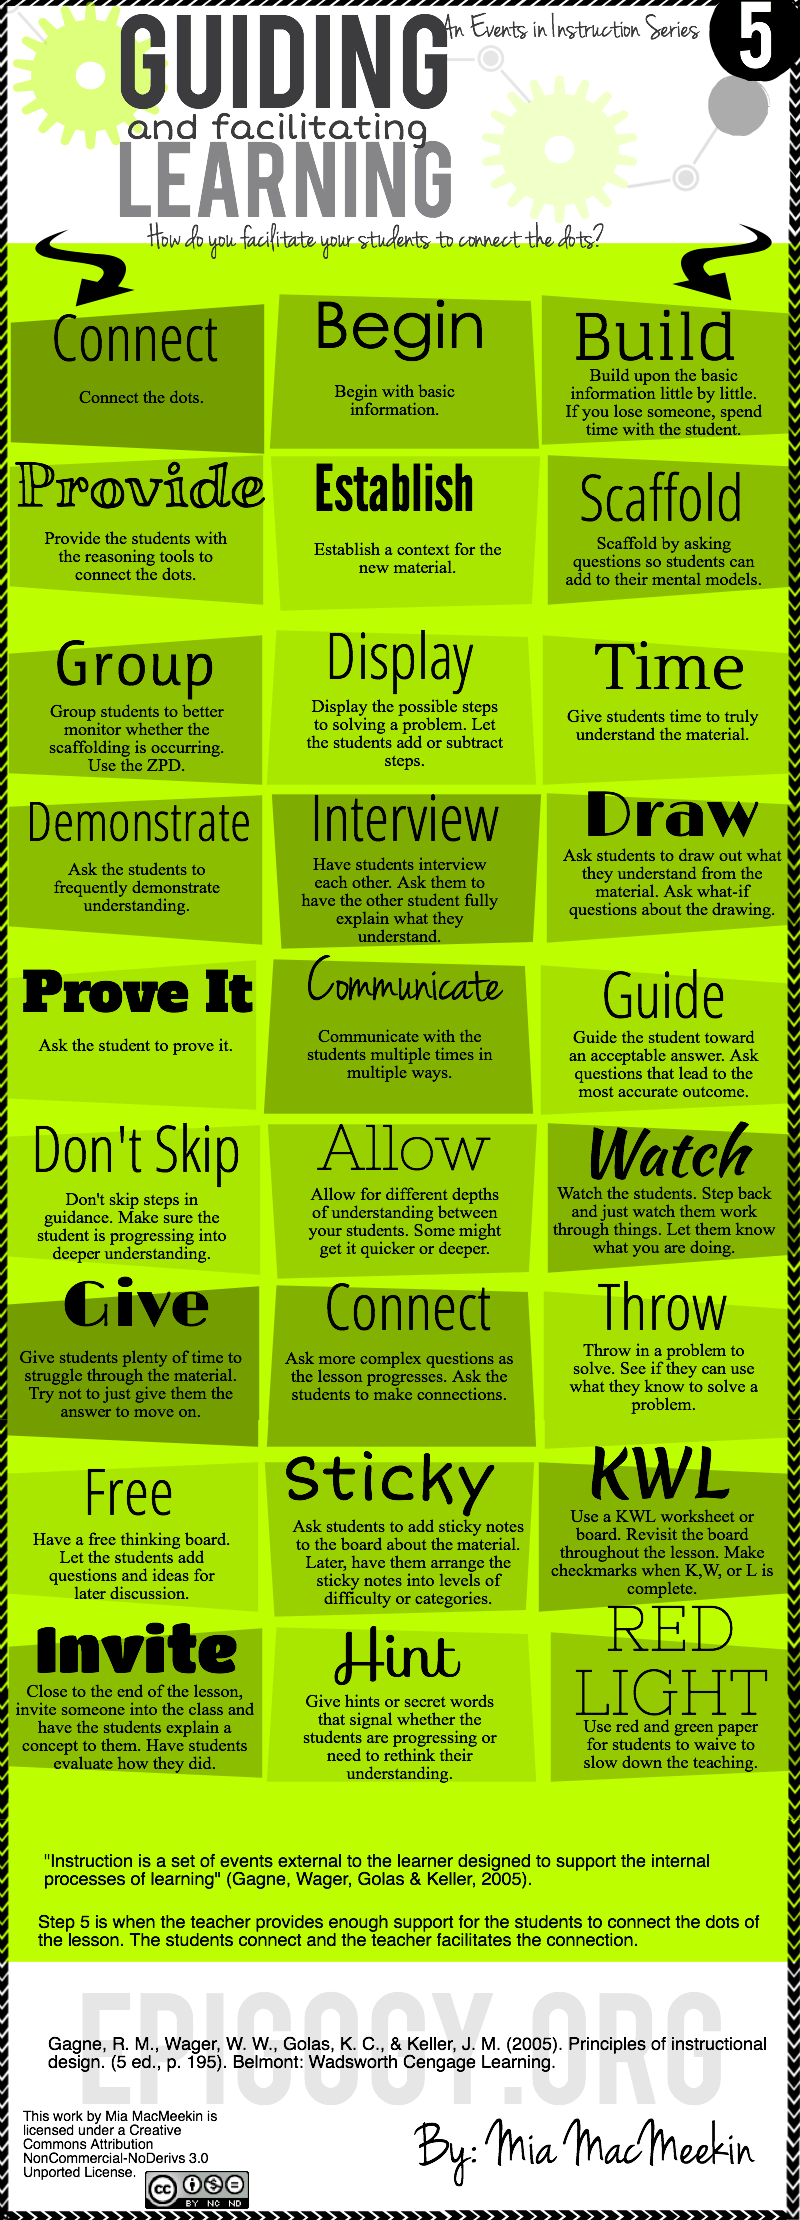 27-Ways-Teachers-Can-Guide-and-Facilitate-Learning-Infographic